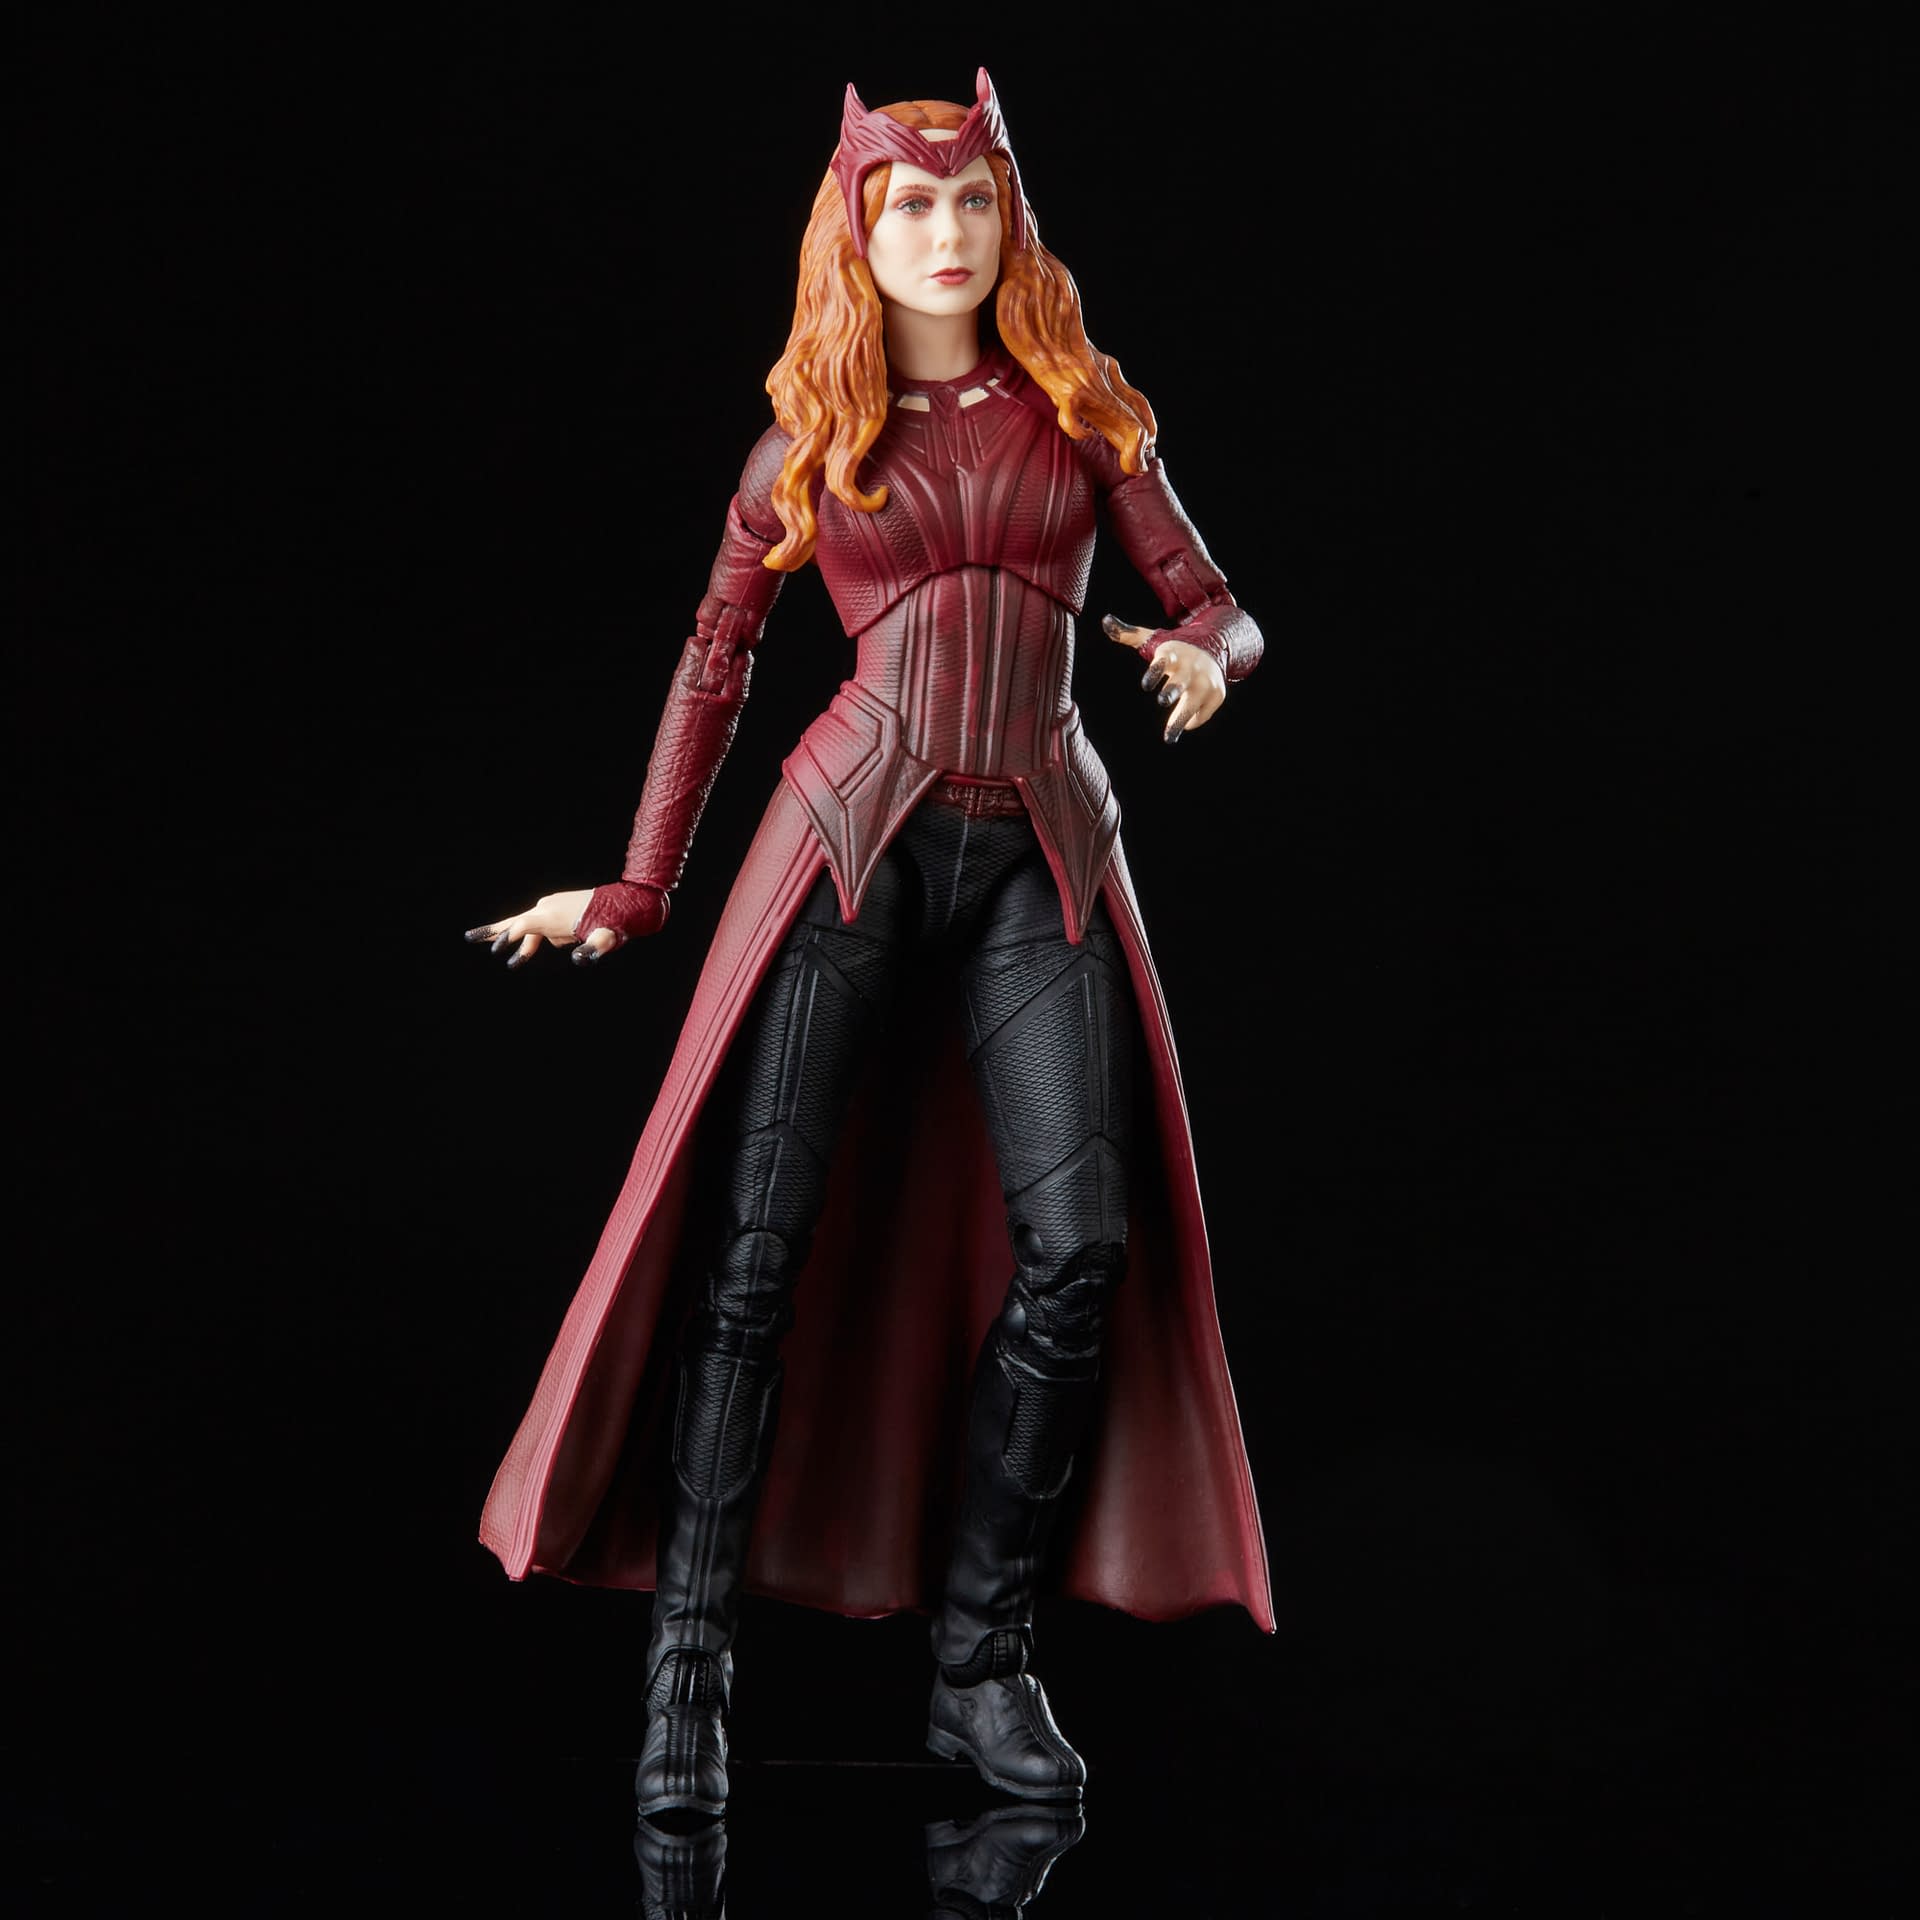 Return to the Multiverse of Madness with Marvel Legends Scarlet Witch